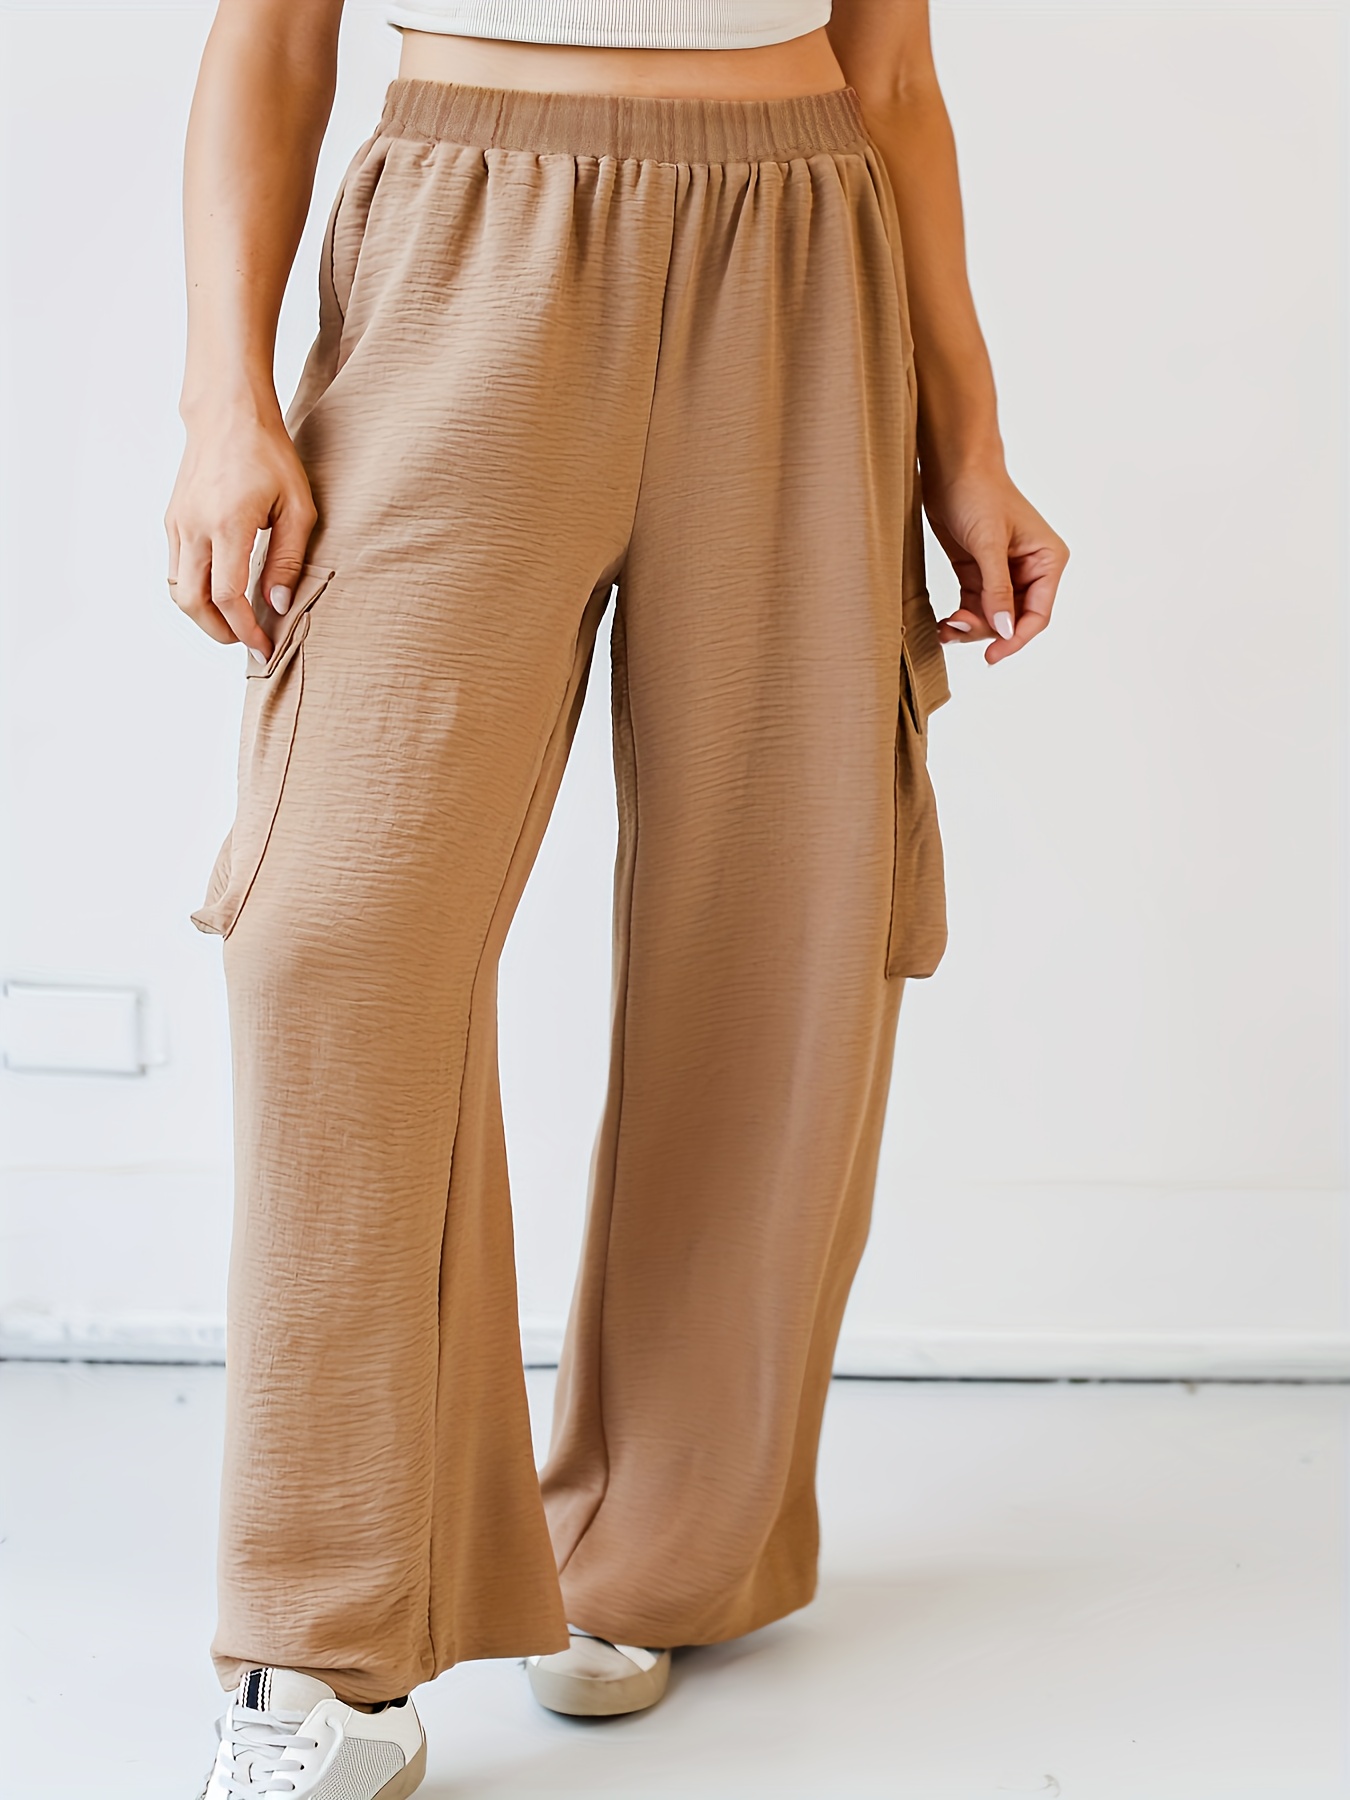 TIYOMI Ladies Plus Size Pants 4X Brown Casual Full Length Ankle